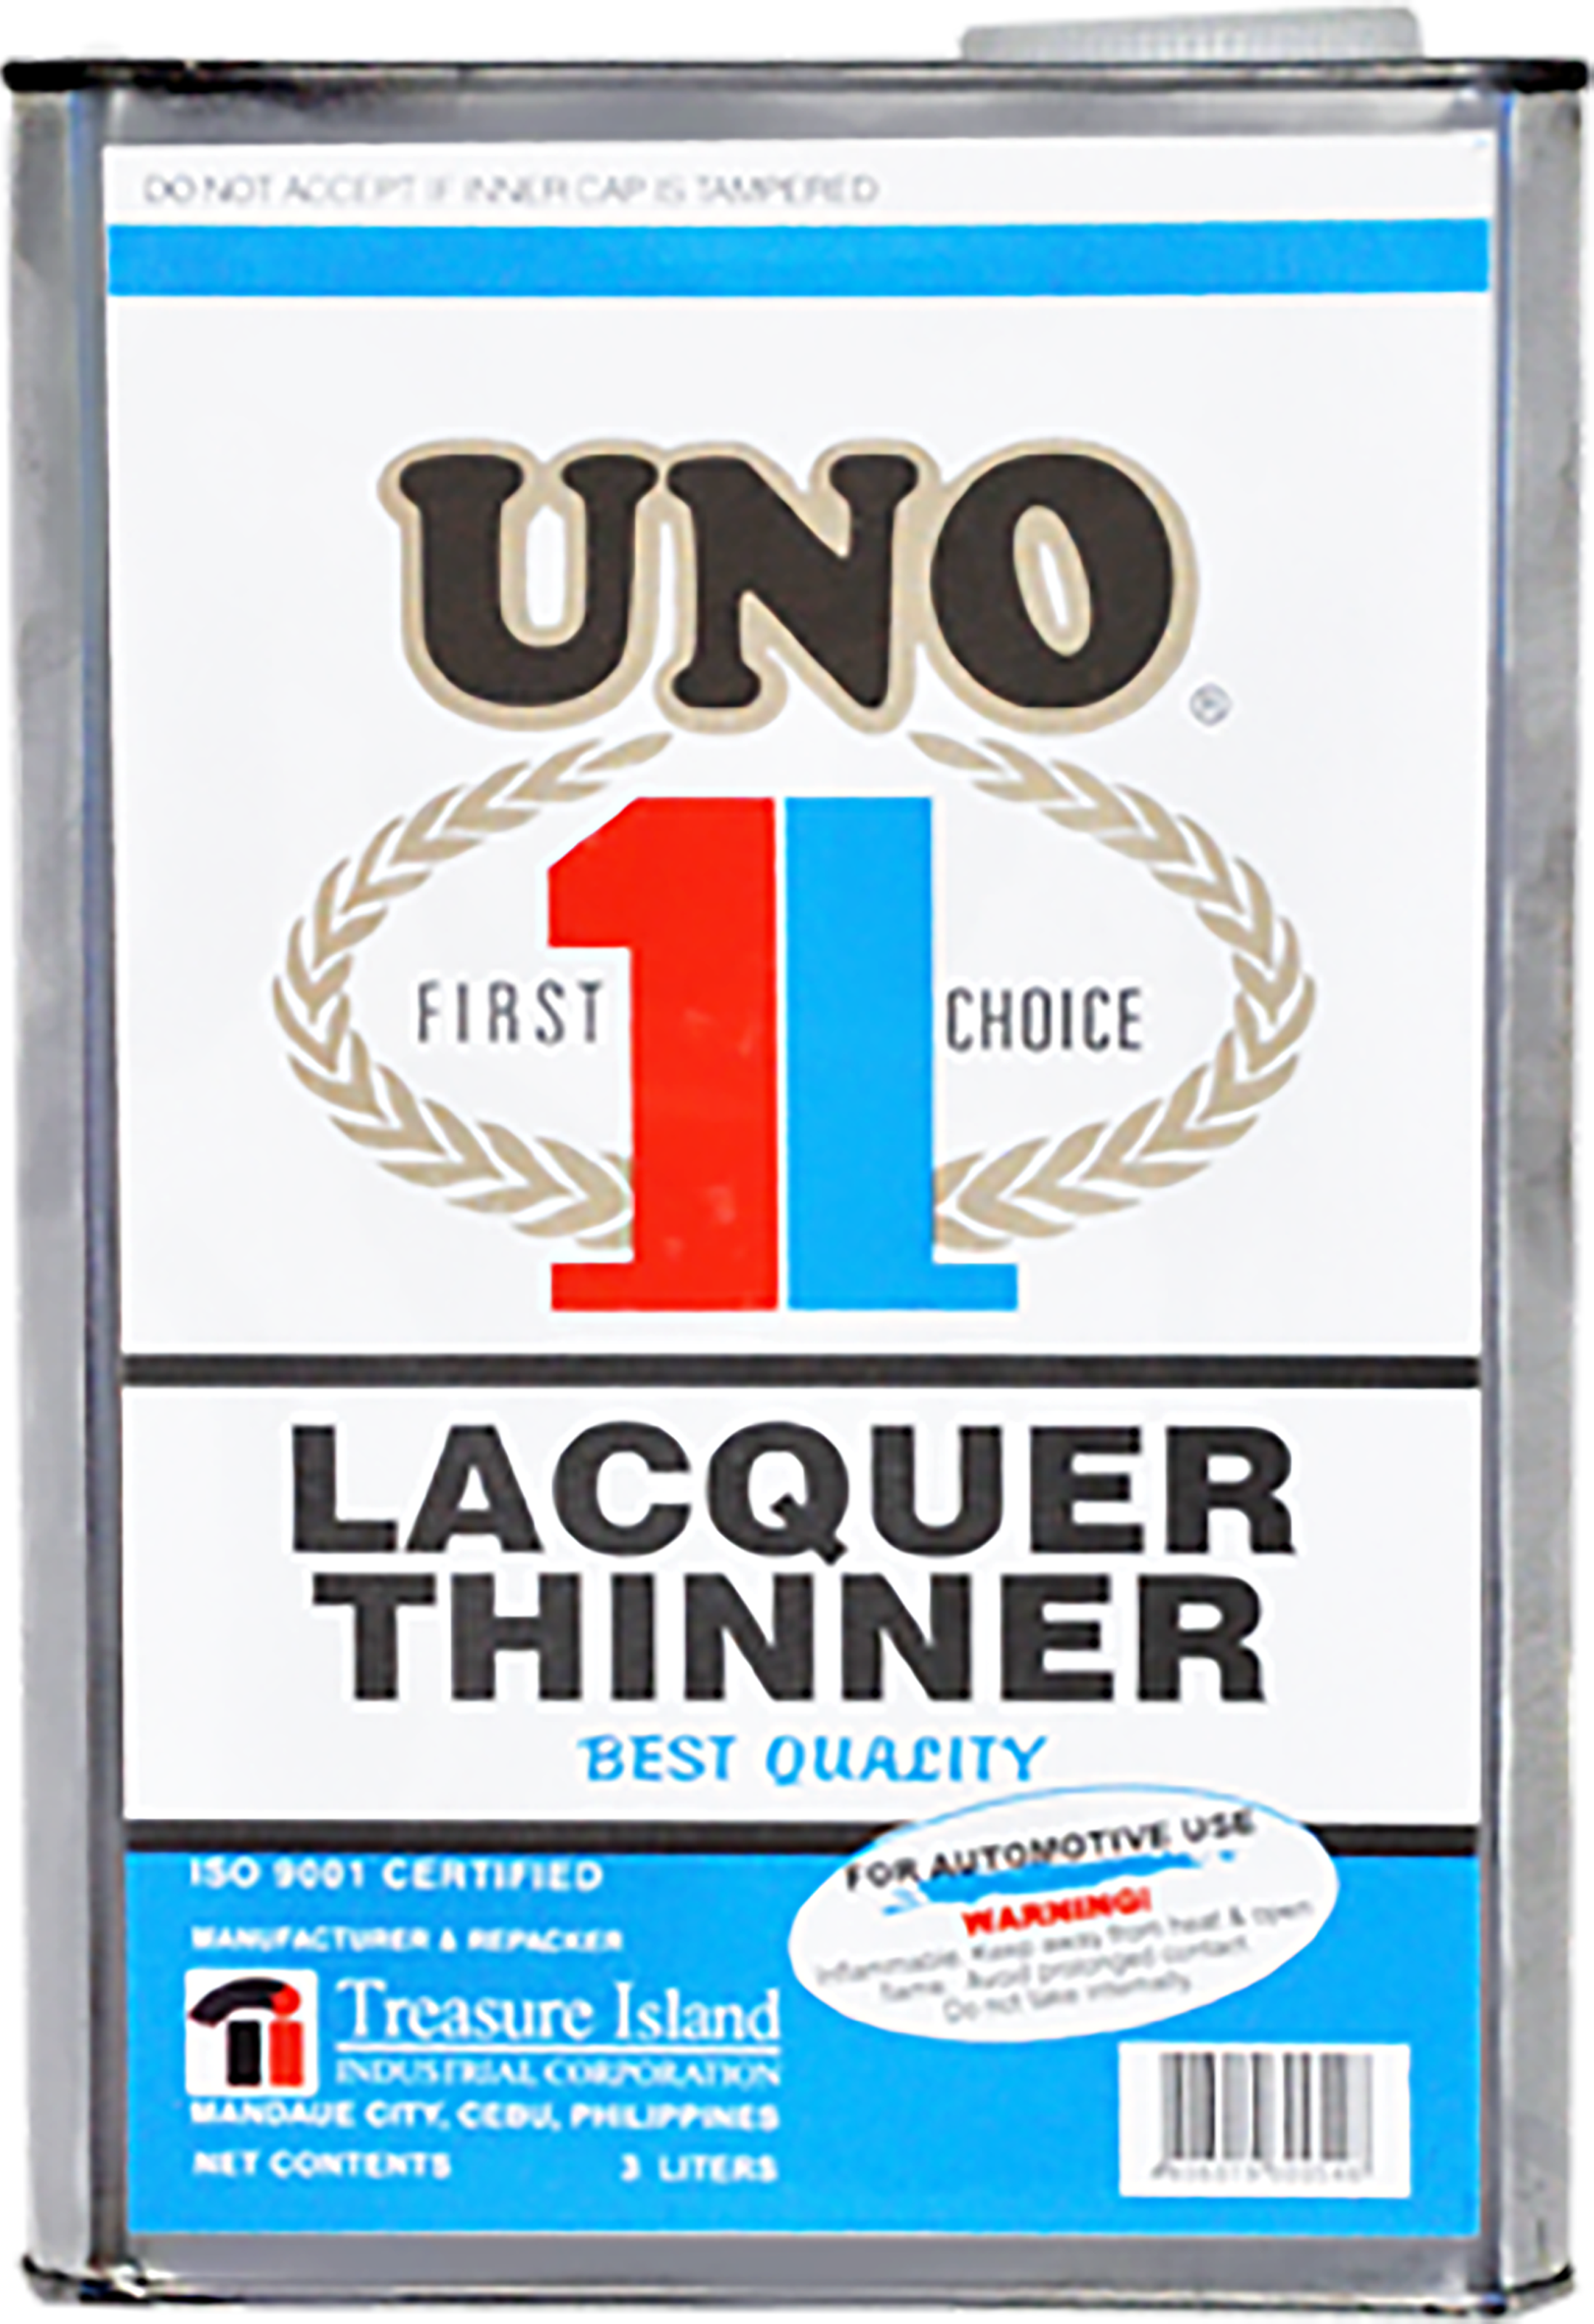 Uno-Lacquer-Thinner-(1)